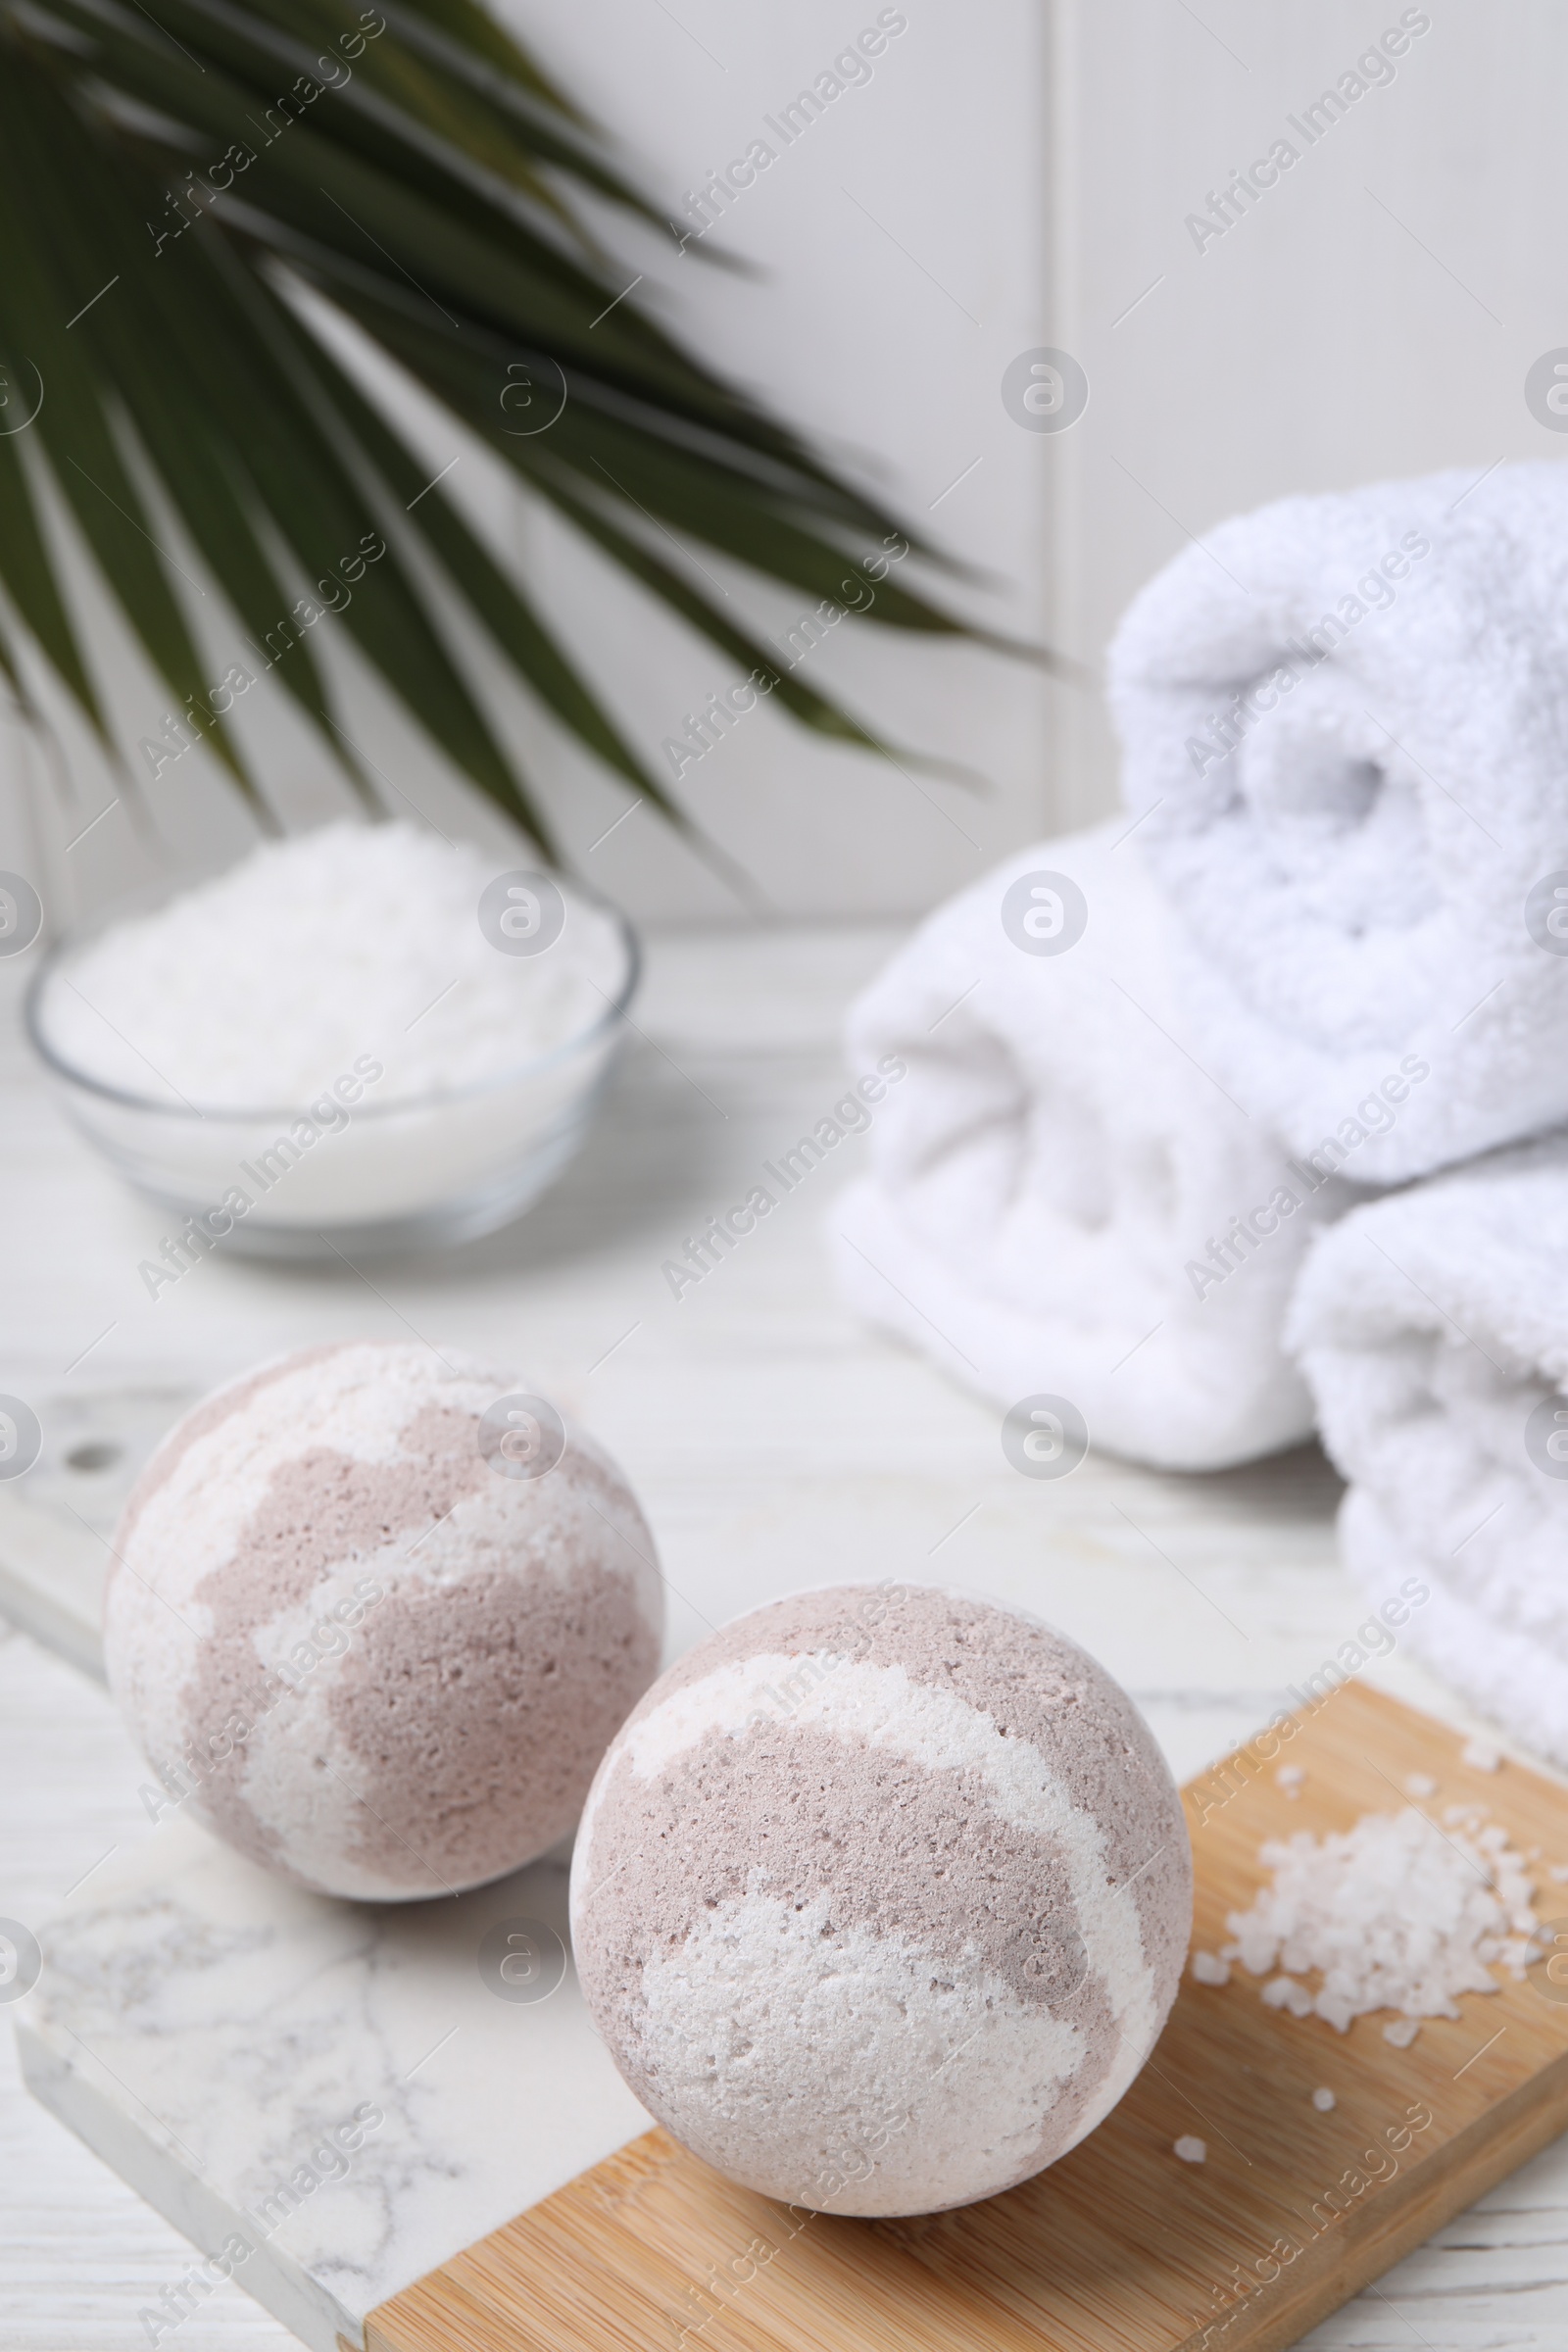 Photo of Bath bombs, sea salt and rolled towels on white wooden table